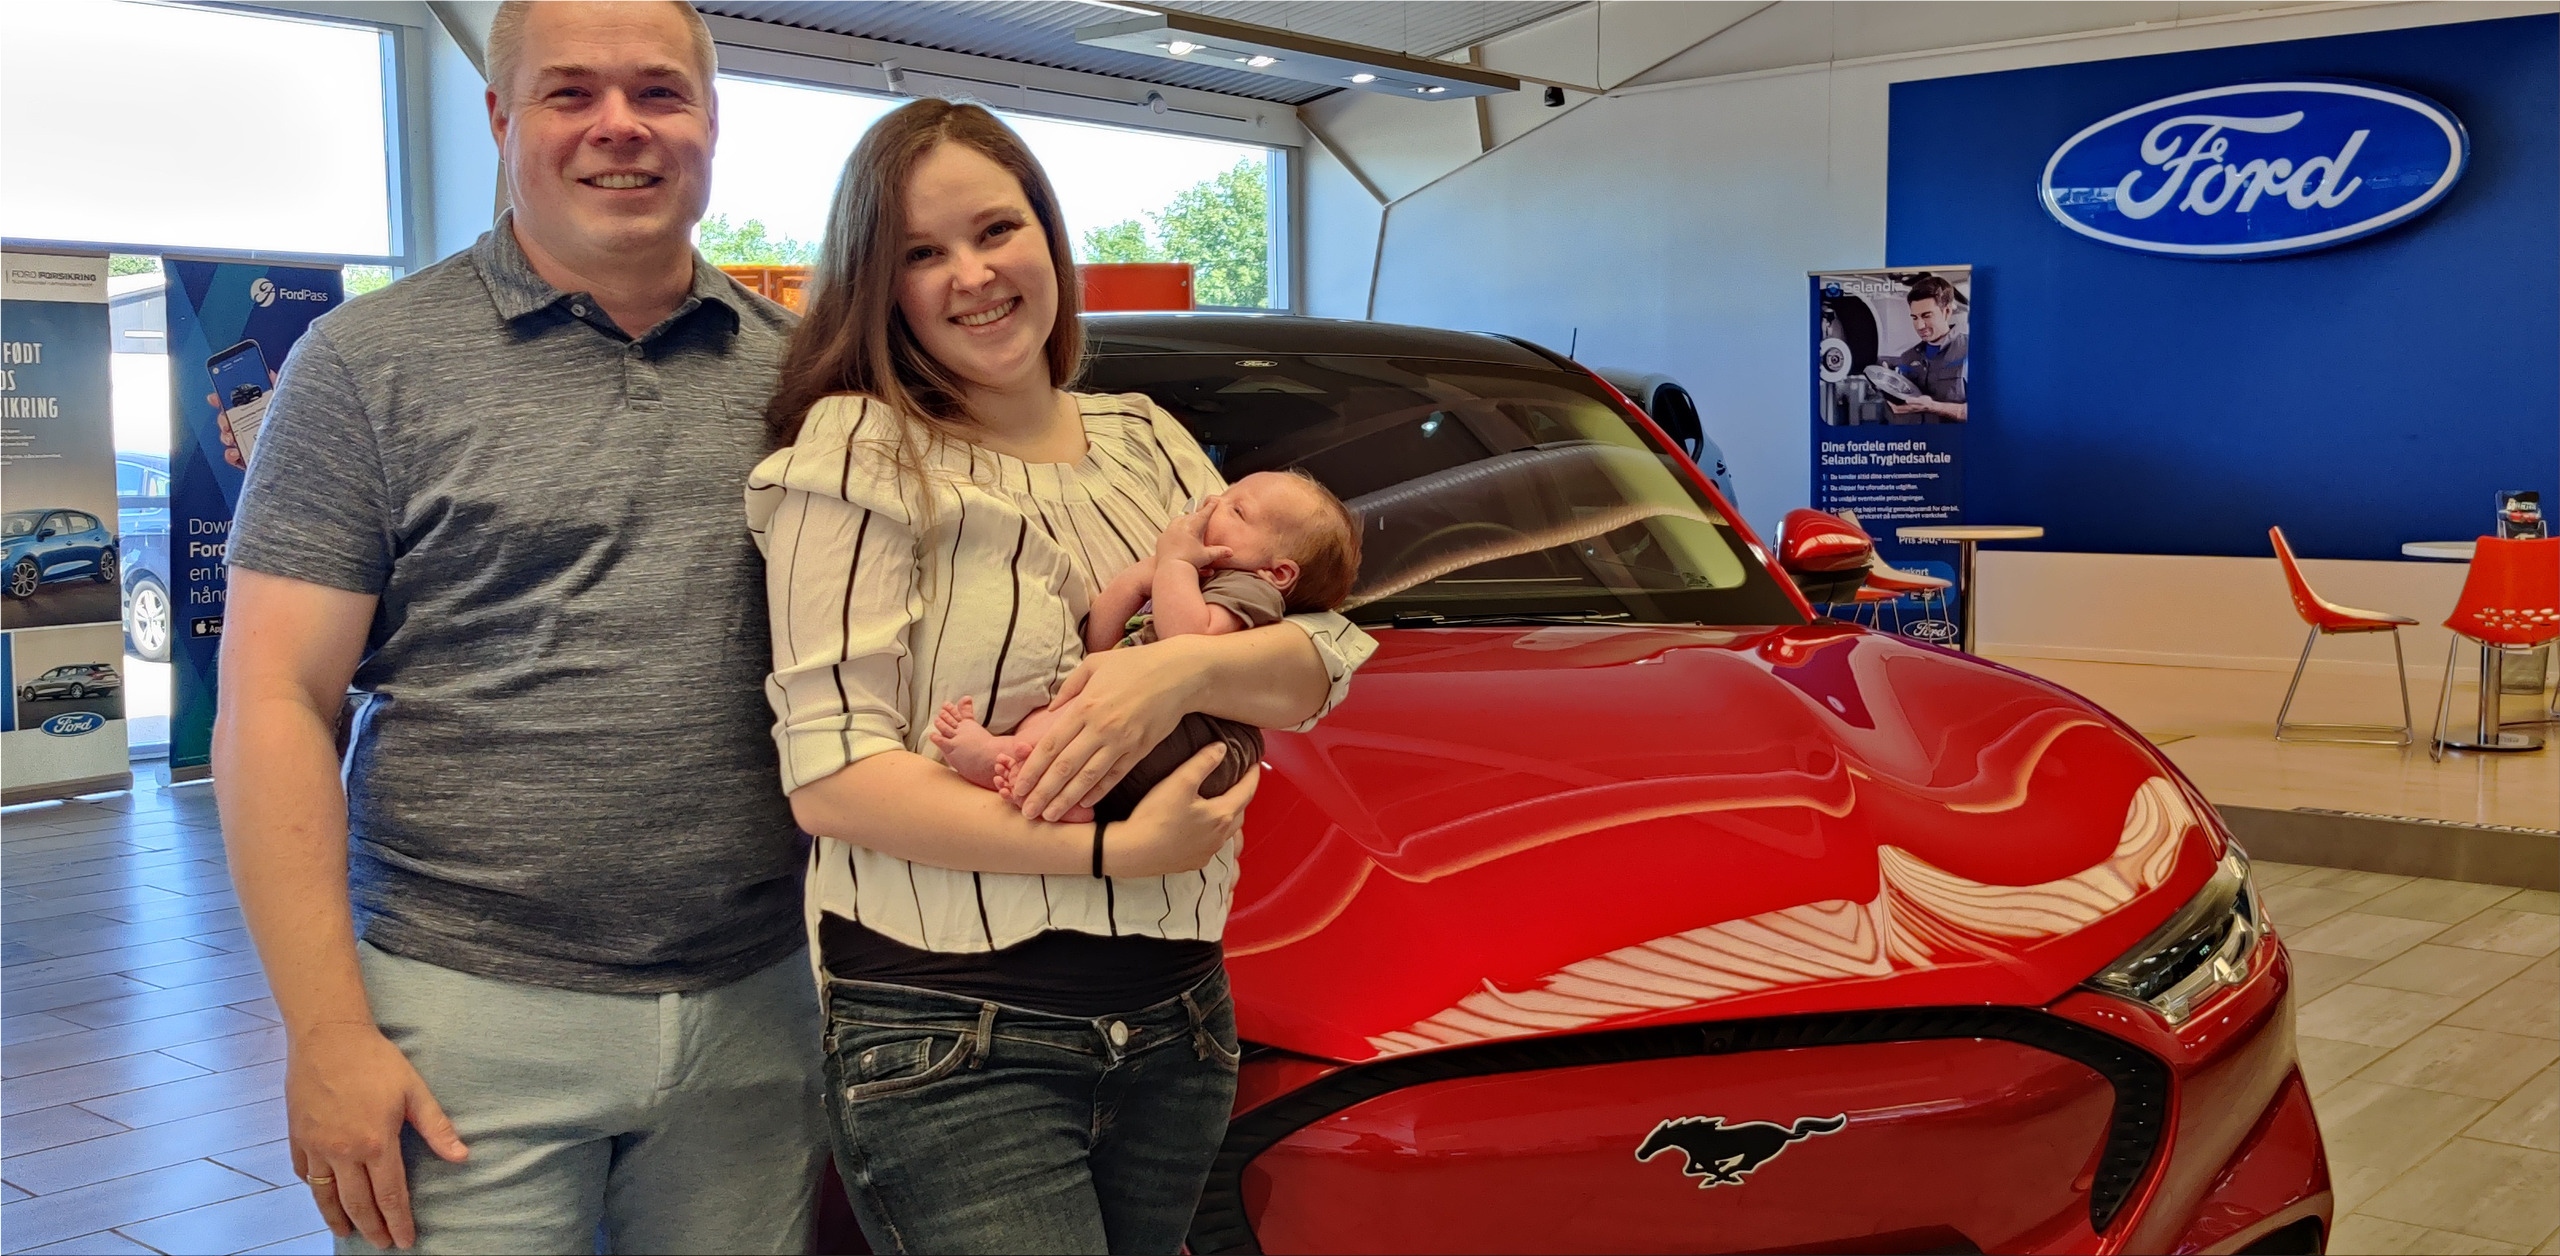 A woman gave birth in her Ford Mustang Mach-E electric car